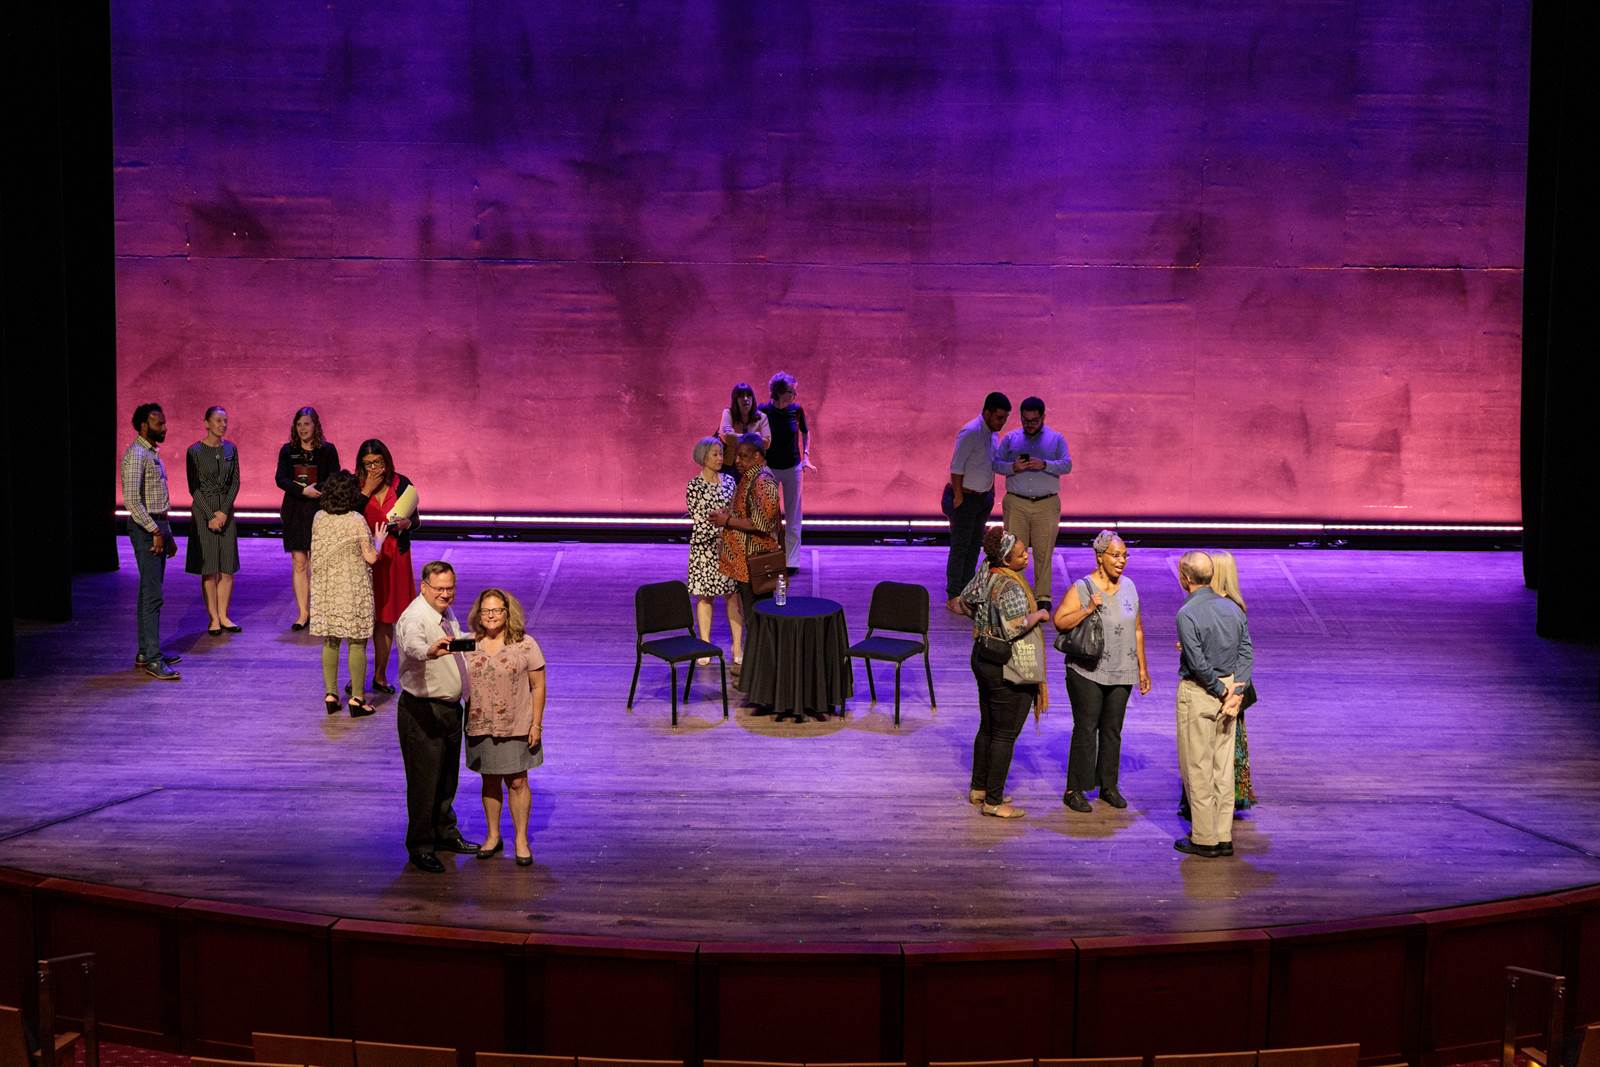 Kennedy Center Members standing on stage during a reception.